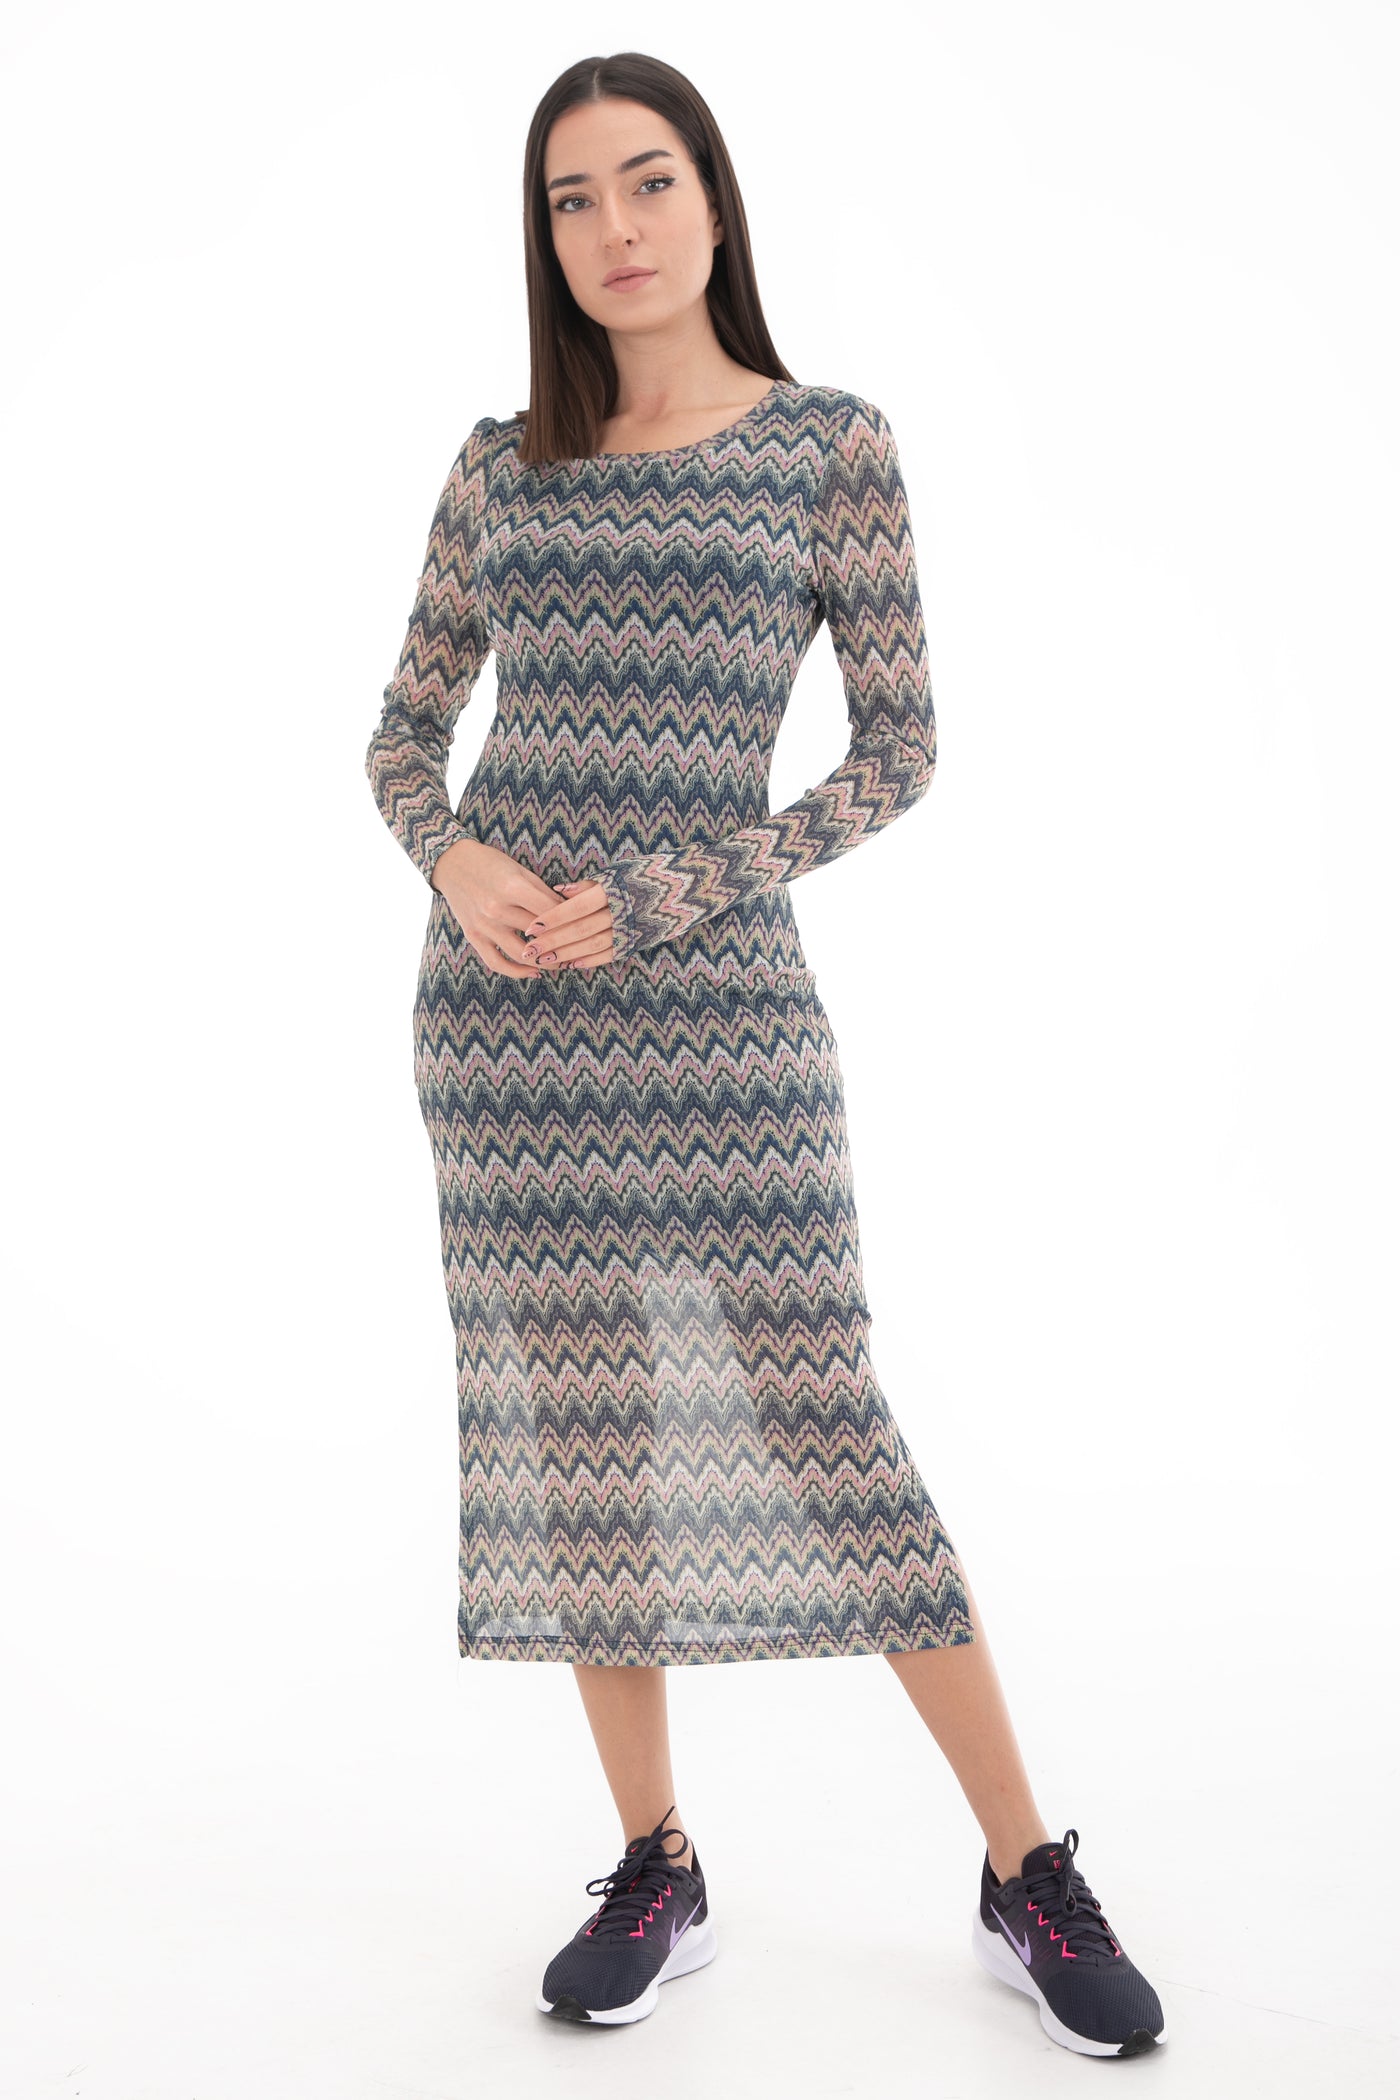 Chassca Printed Long Sleeve Recycled Polyester Mesh Dress